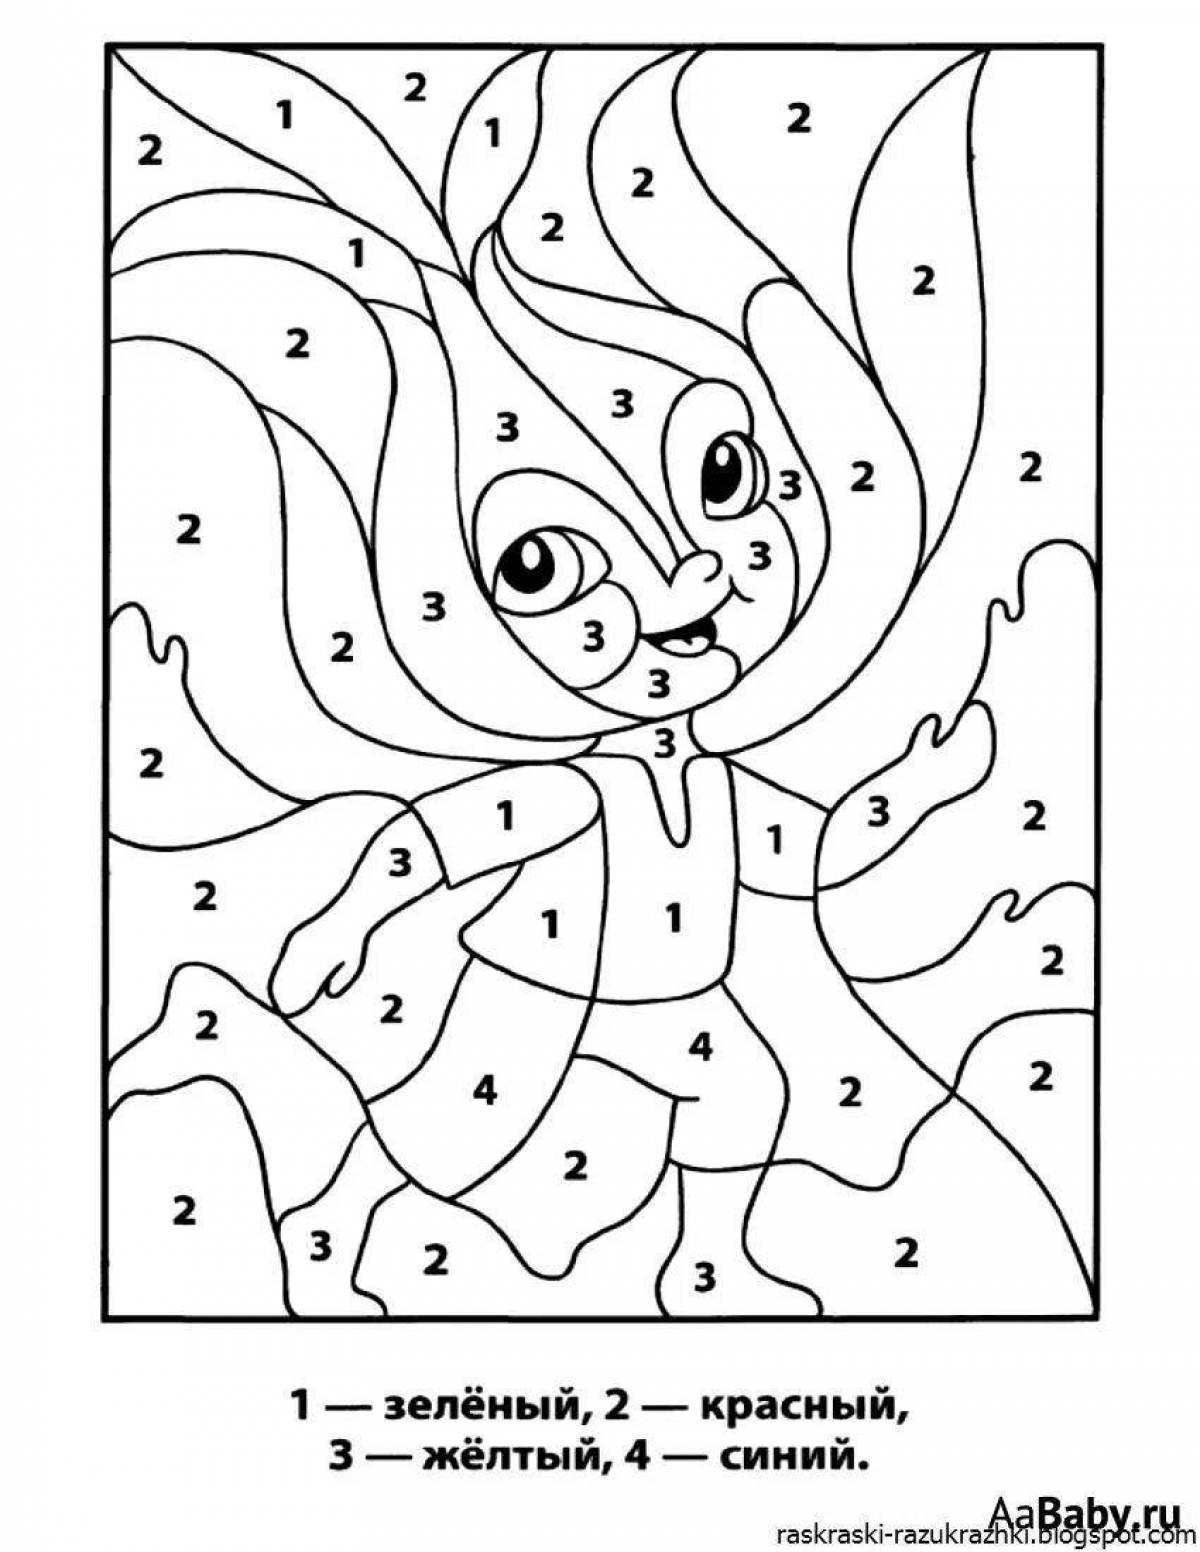 Красочная иллюзия 7 years by numbers coloring page